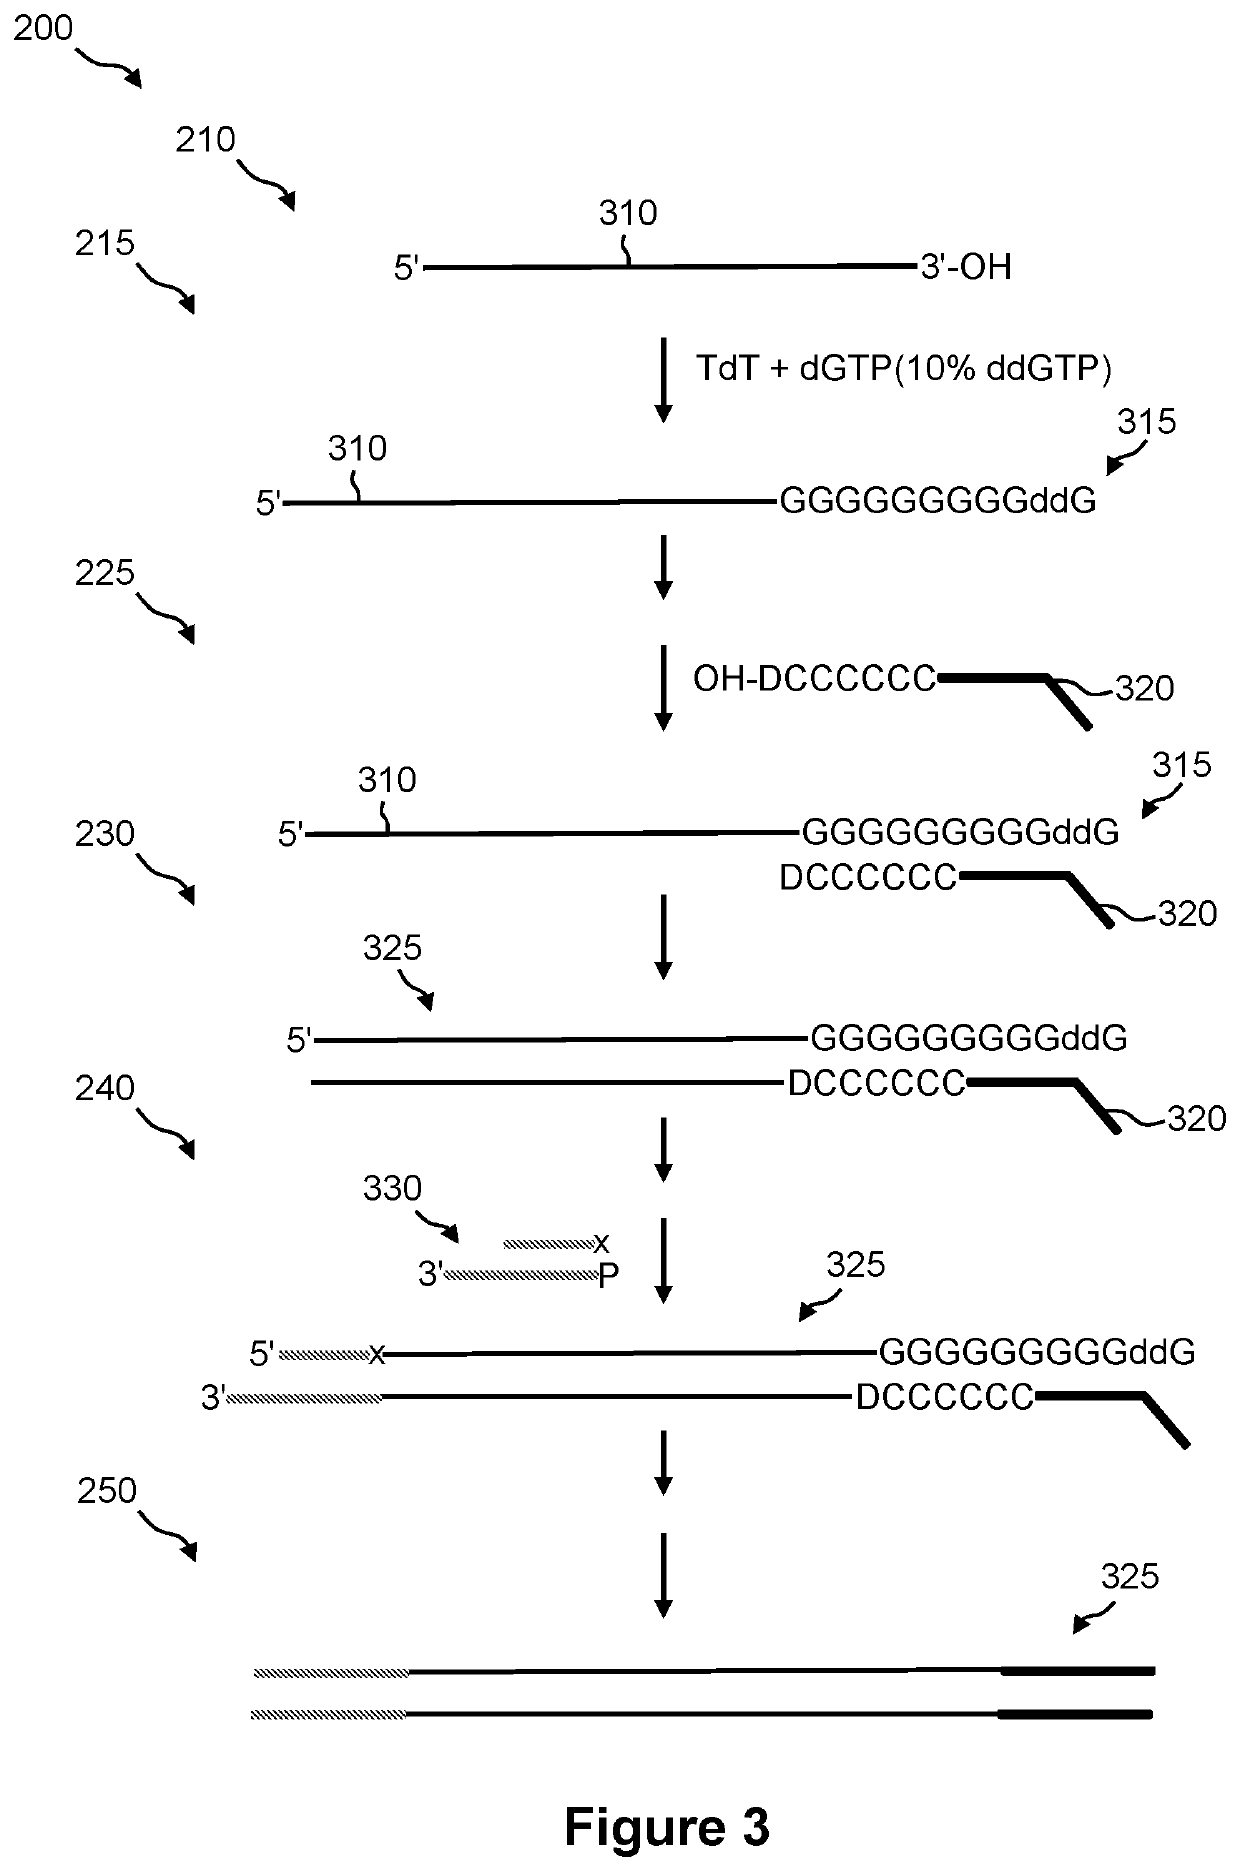 Methods for preparing a sequencing library from single-stranded DNA